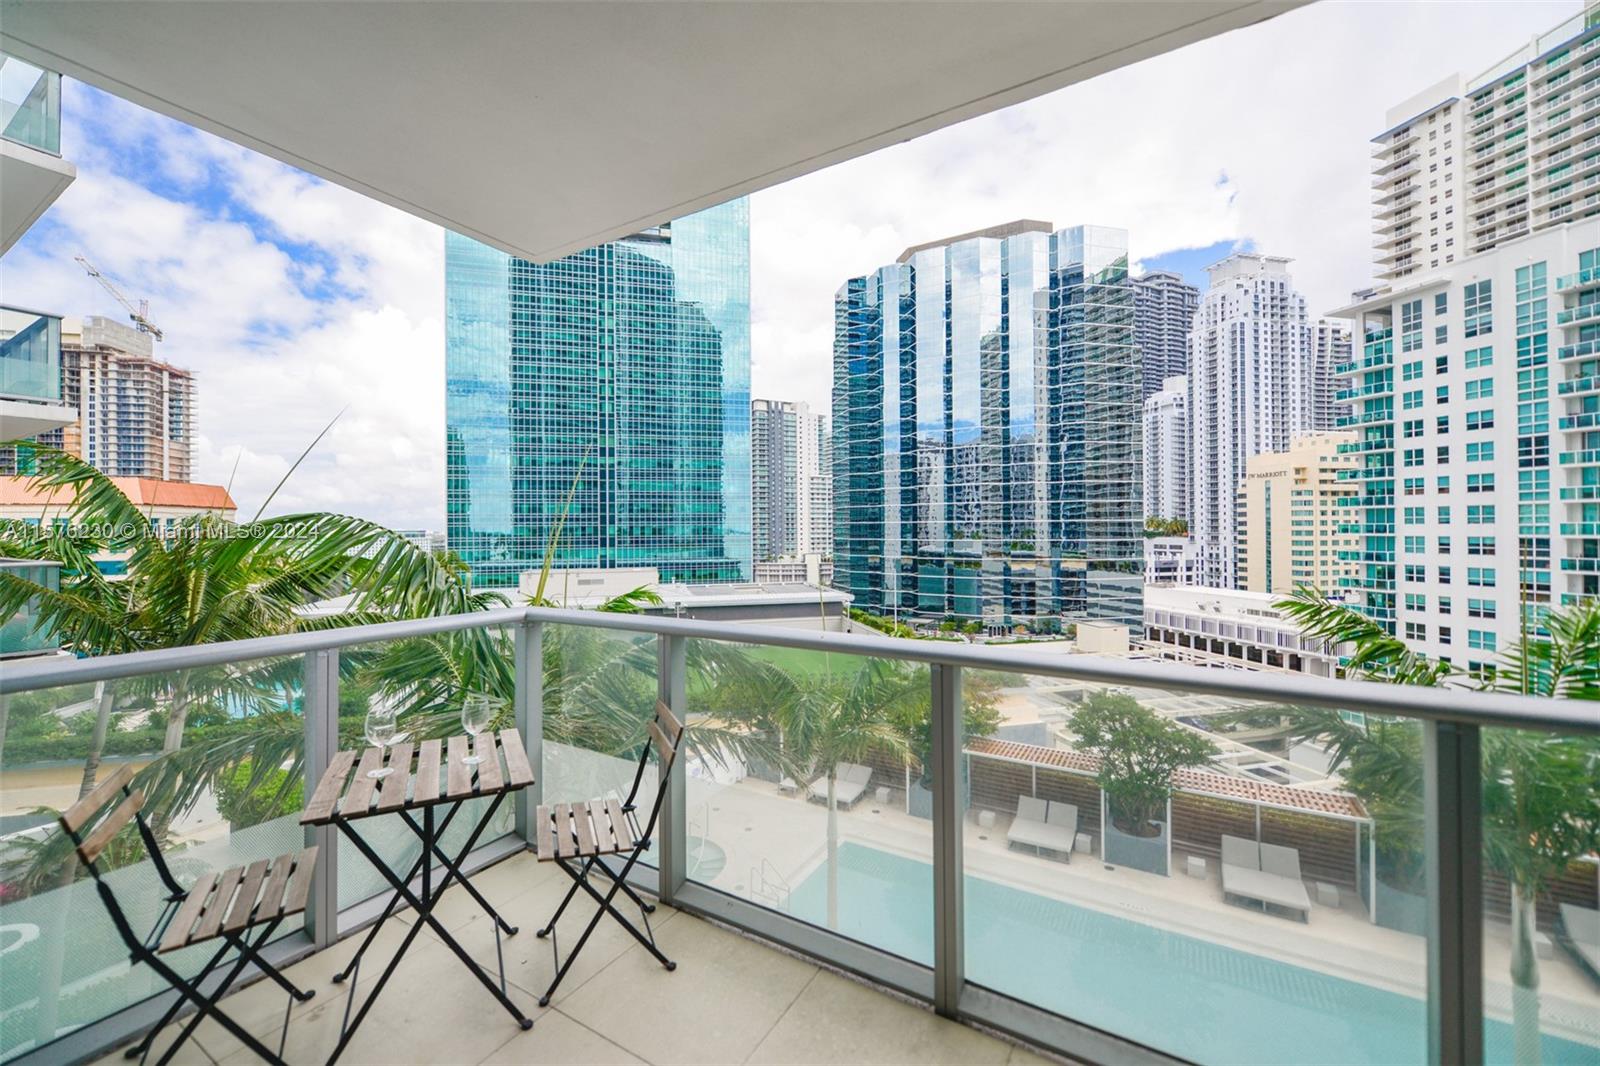 Spectacular studio at the iconic BrickellHouse. Upgraded studio with floor to ceiling glass walls, spacious balcony with spectacular open view, window treatments, modern Italian cabinetry throughout, porcelain floors, among others. The building features 24hr concierge, rooftop sky-deck at 46 floor with pool, spa, sauna, fitness center, entertainment suite, valet parking, restaurants, movie theater, among other. Excellent location with easy access to public transportation & highways.